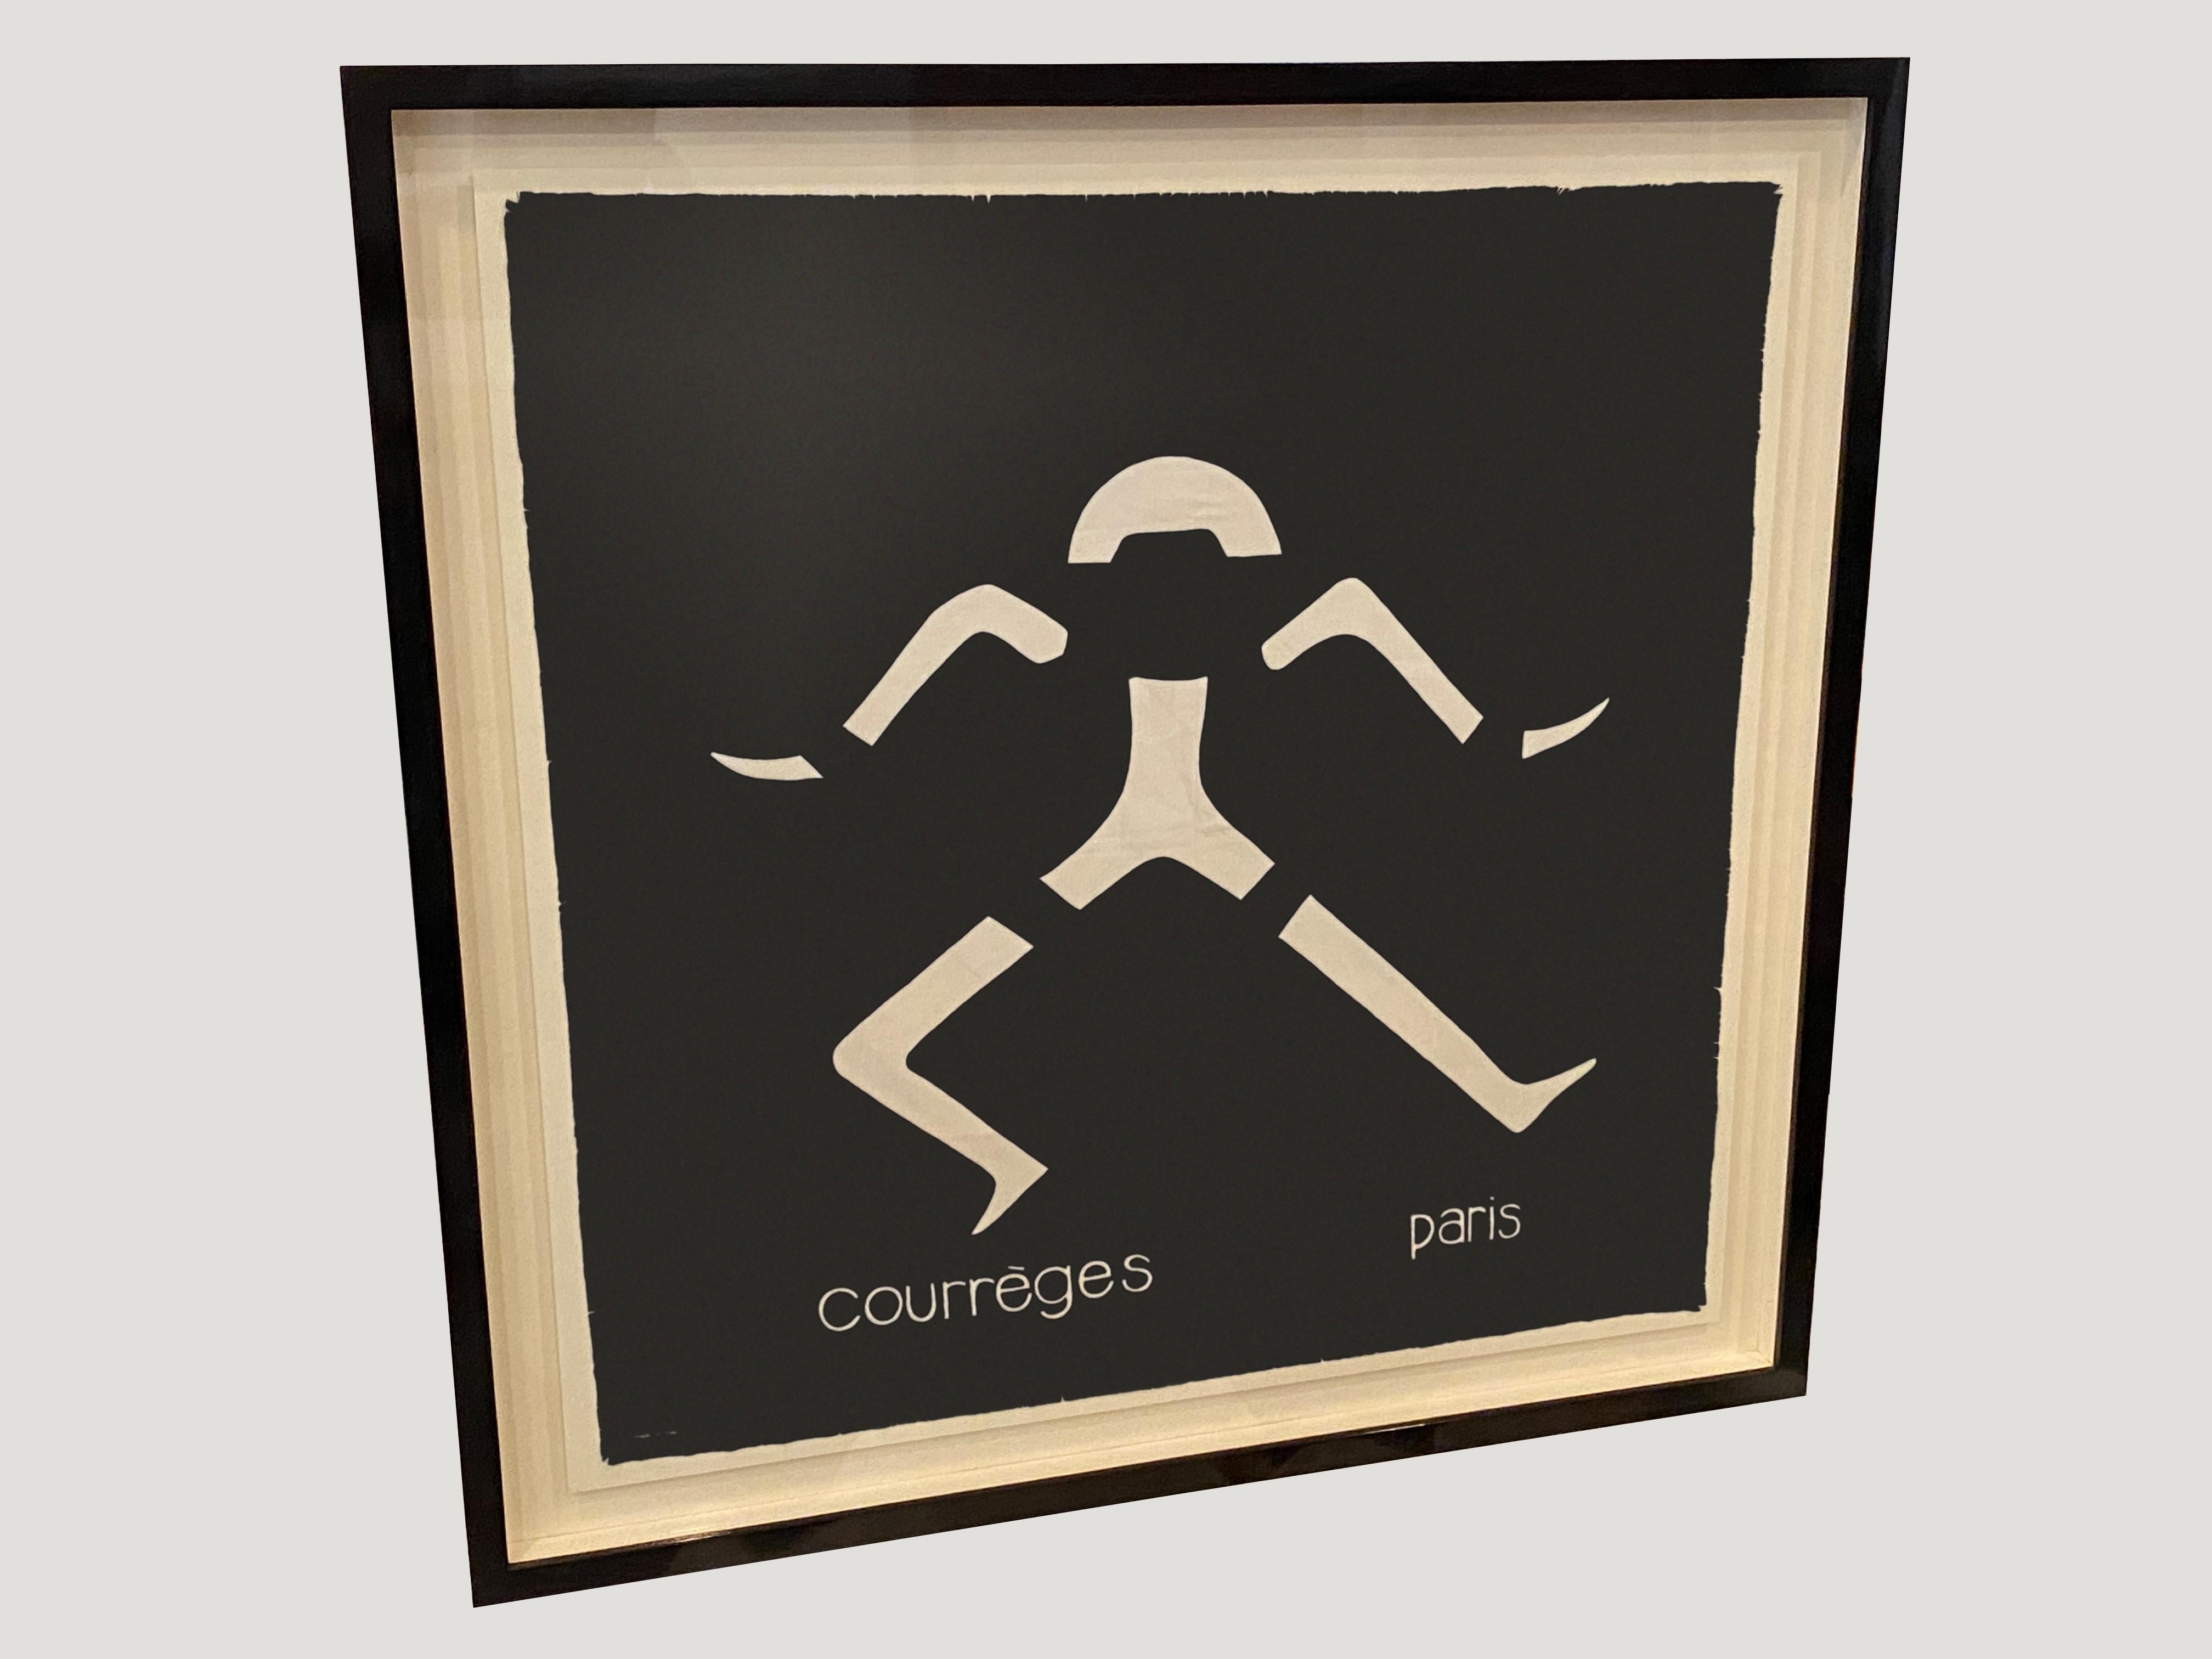 Rare, vintage silk black and white Courrèges scarf from Paris France in excellent condition. Set in a modern espresso teak box frame.

Andrianna Shamaris. The Leader In Modern Organic Design.